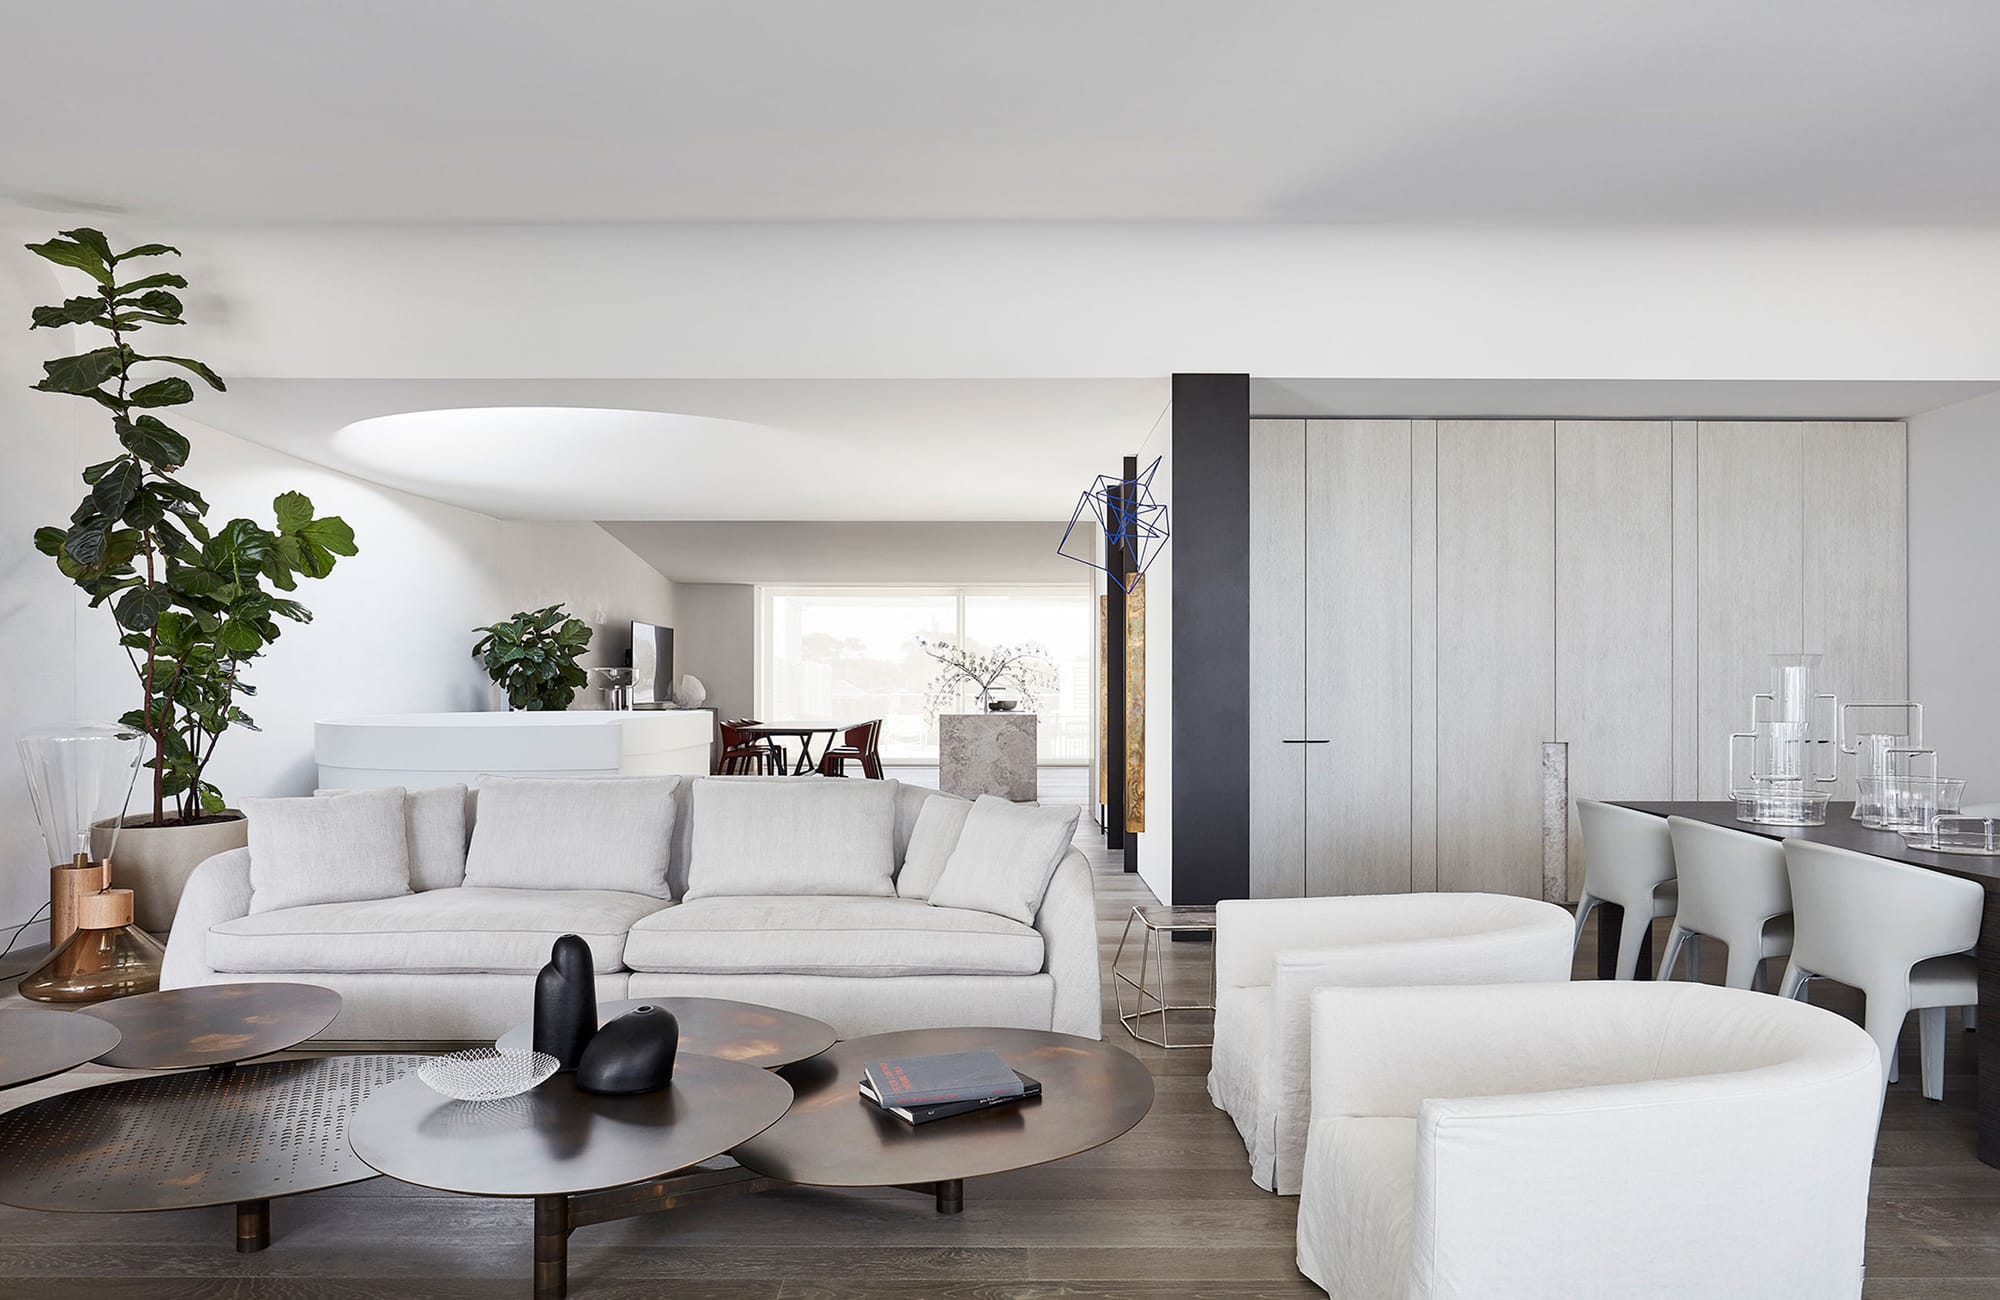 Arc Side by Jolson. Photography by Lucas Allen. Landscape image of residential living space. Tall white walls and ceilings, American Oak timber floors. Plush white couches. Neutral cabinetry along wall. Contemporary, organic coffee table. 